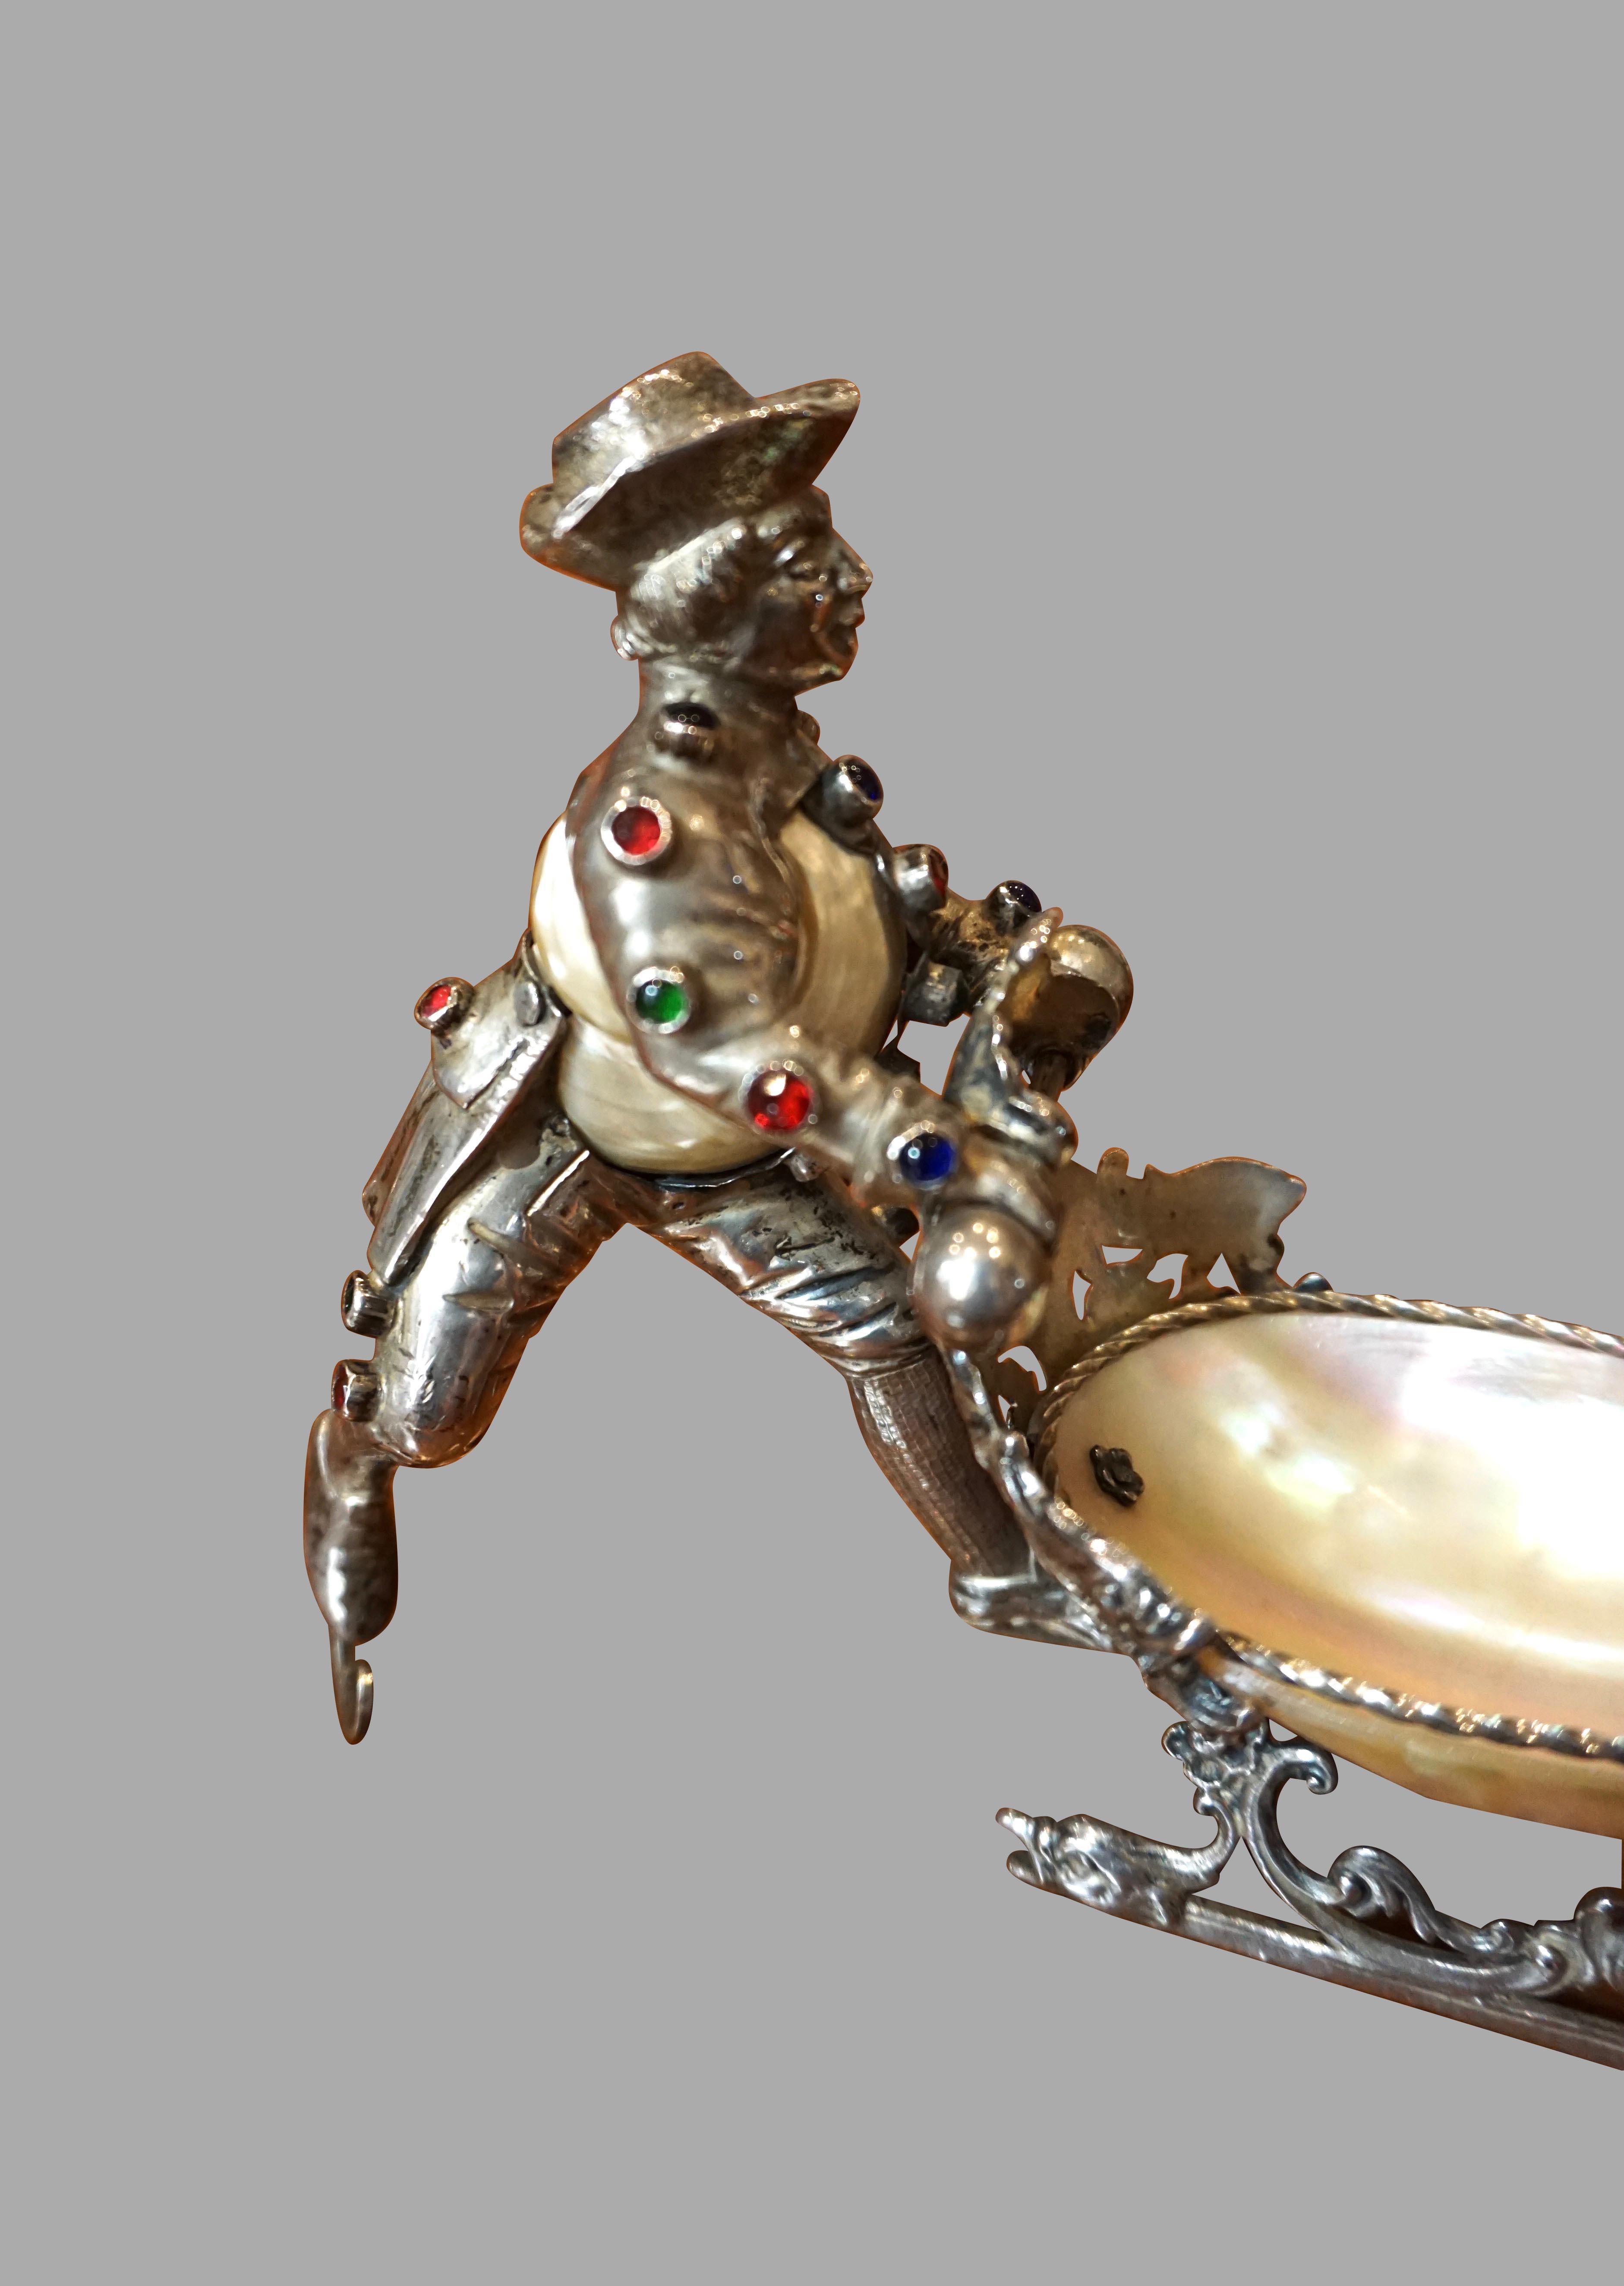 19th Century Dutch Silver Plate and Shell Sleigh Driven by Bejeweled Gentleman on Iceskates